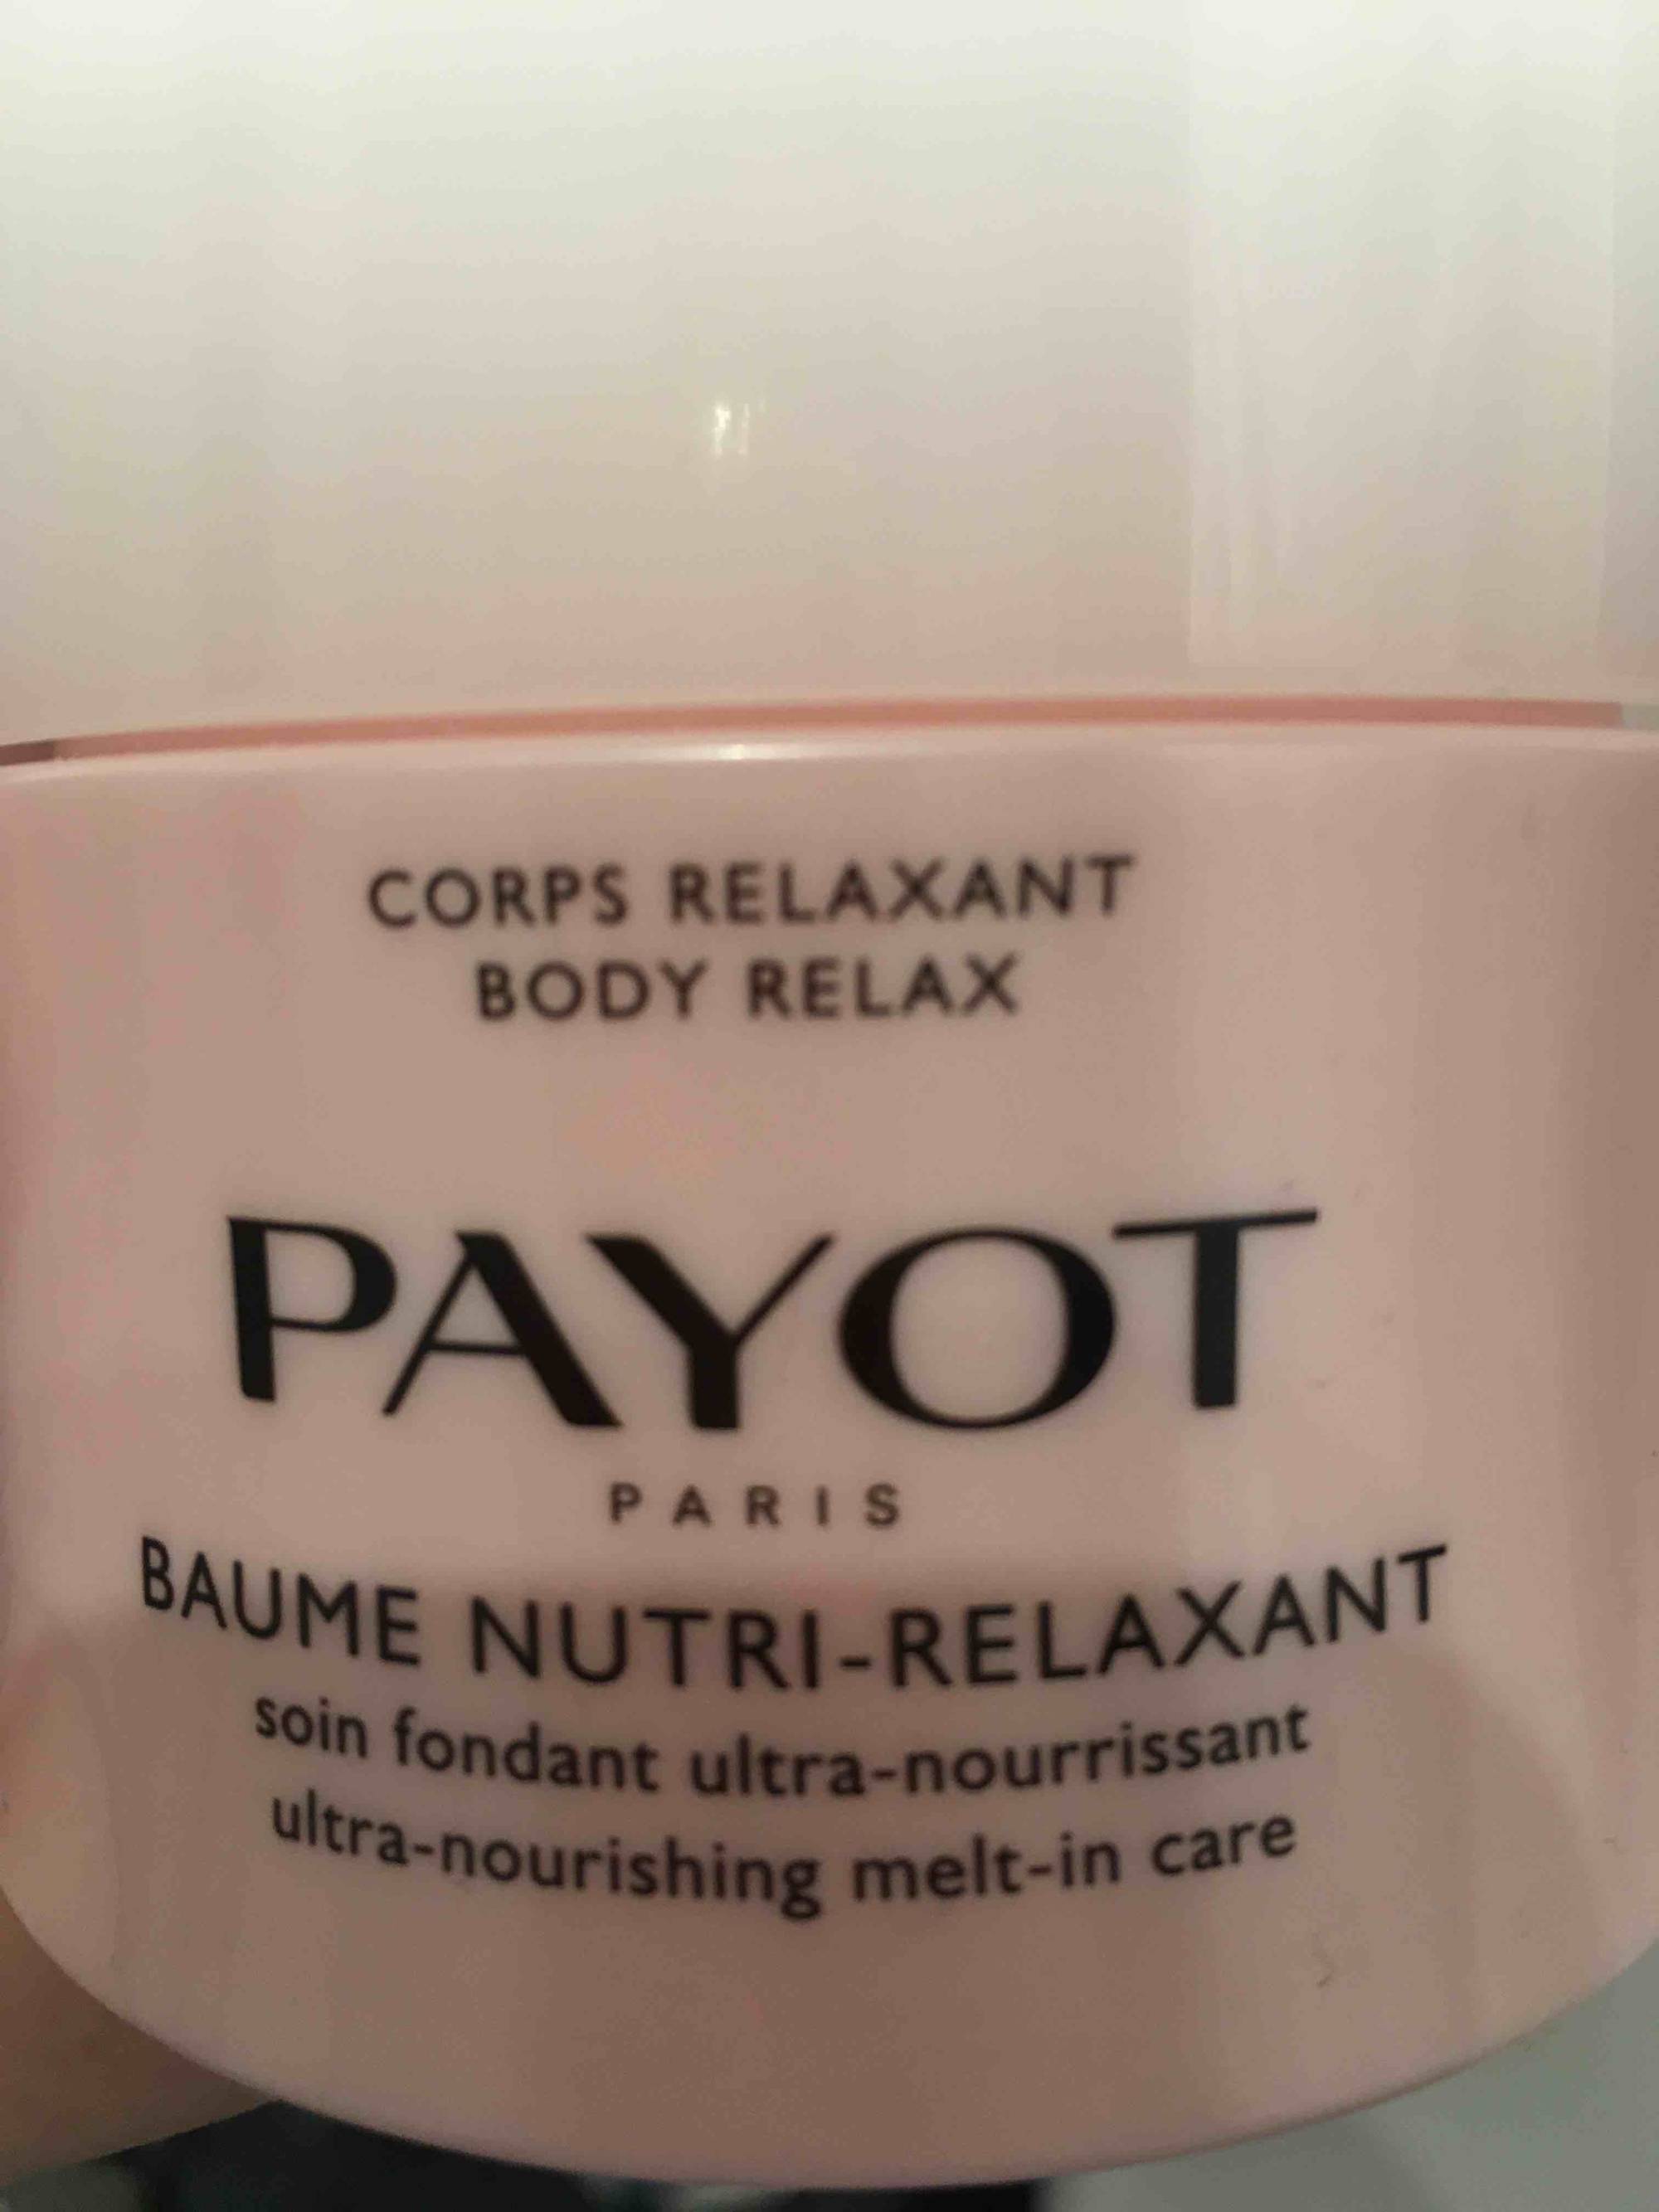 PAYOT - Baume nutri-relaxant